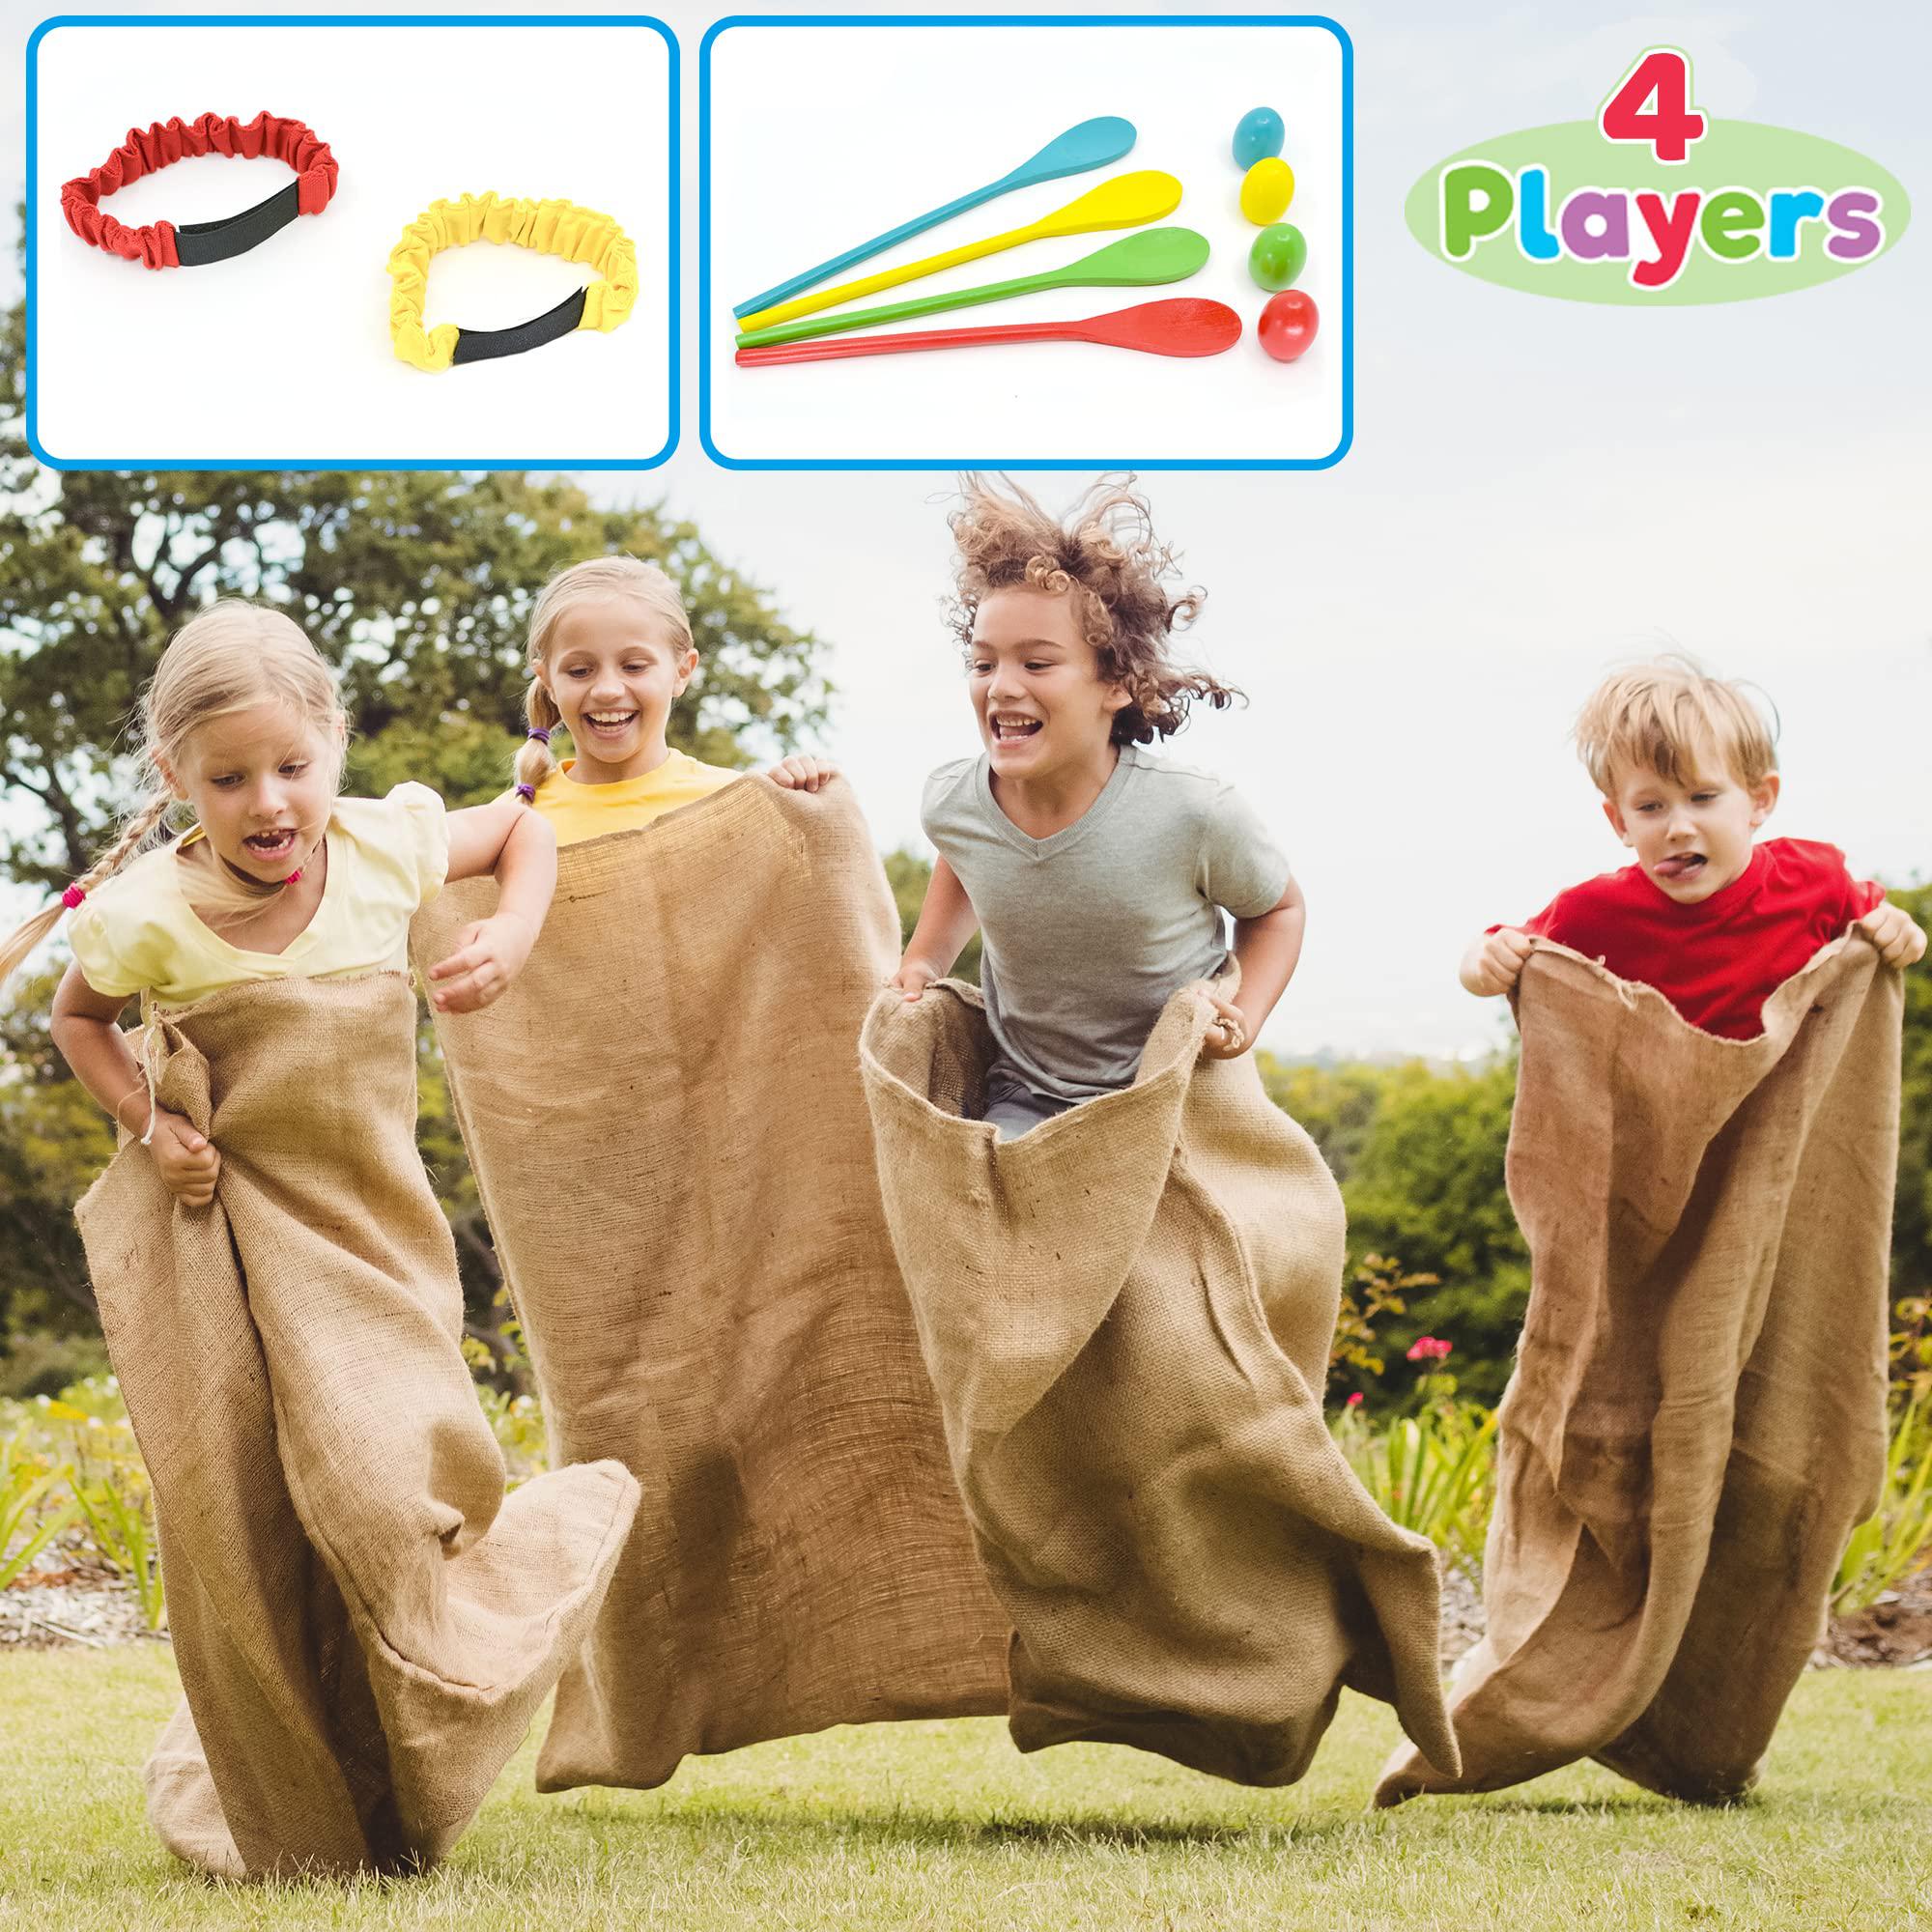 joyin 4 players outdoor lawn games; potato sack race bags, egg and spoon race games, legged relay race bands elastic tie rope